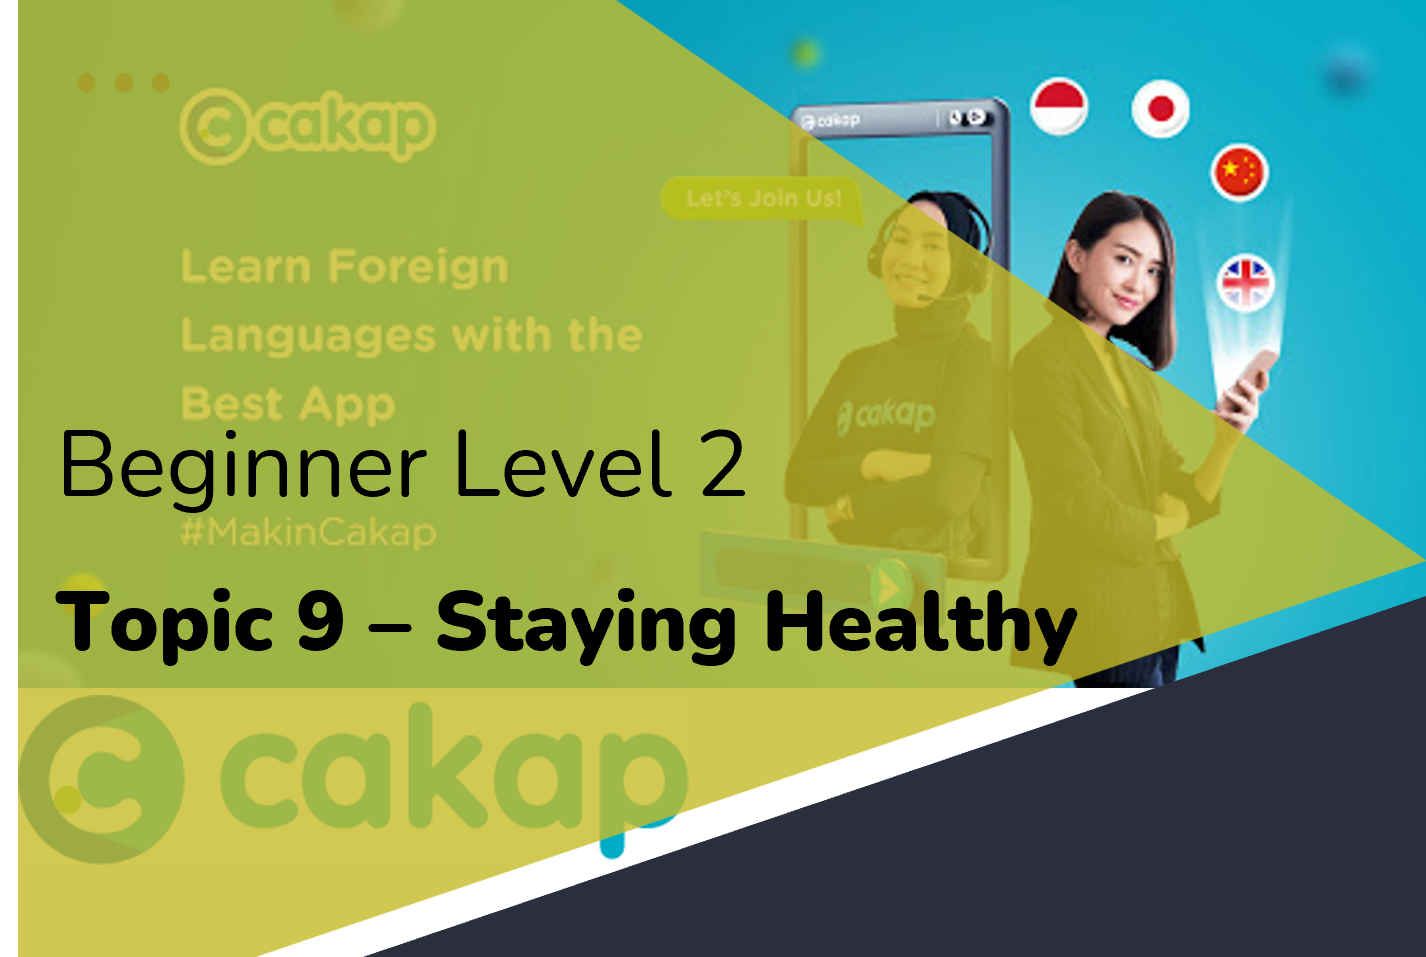 Beginner 2: Topic 9 - Staying Healthy